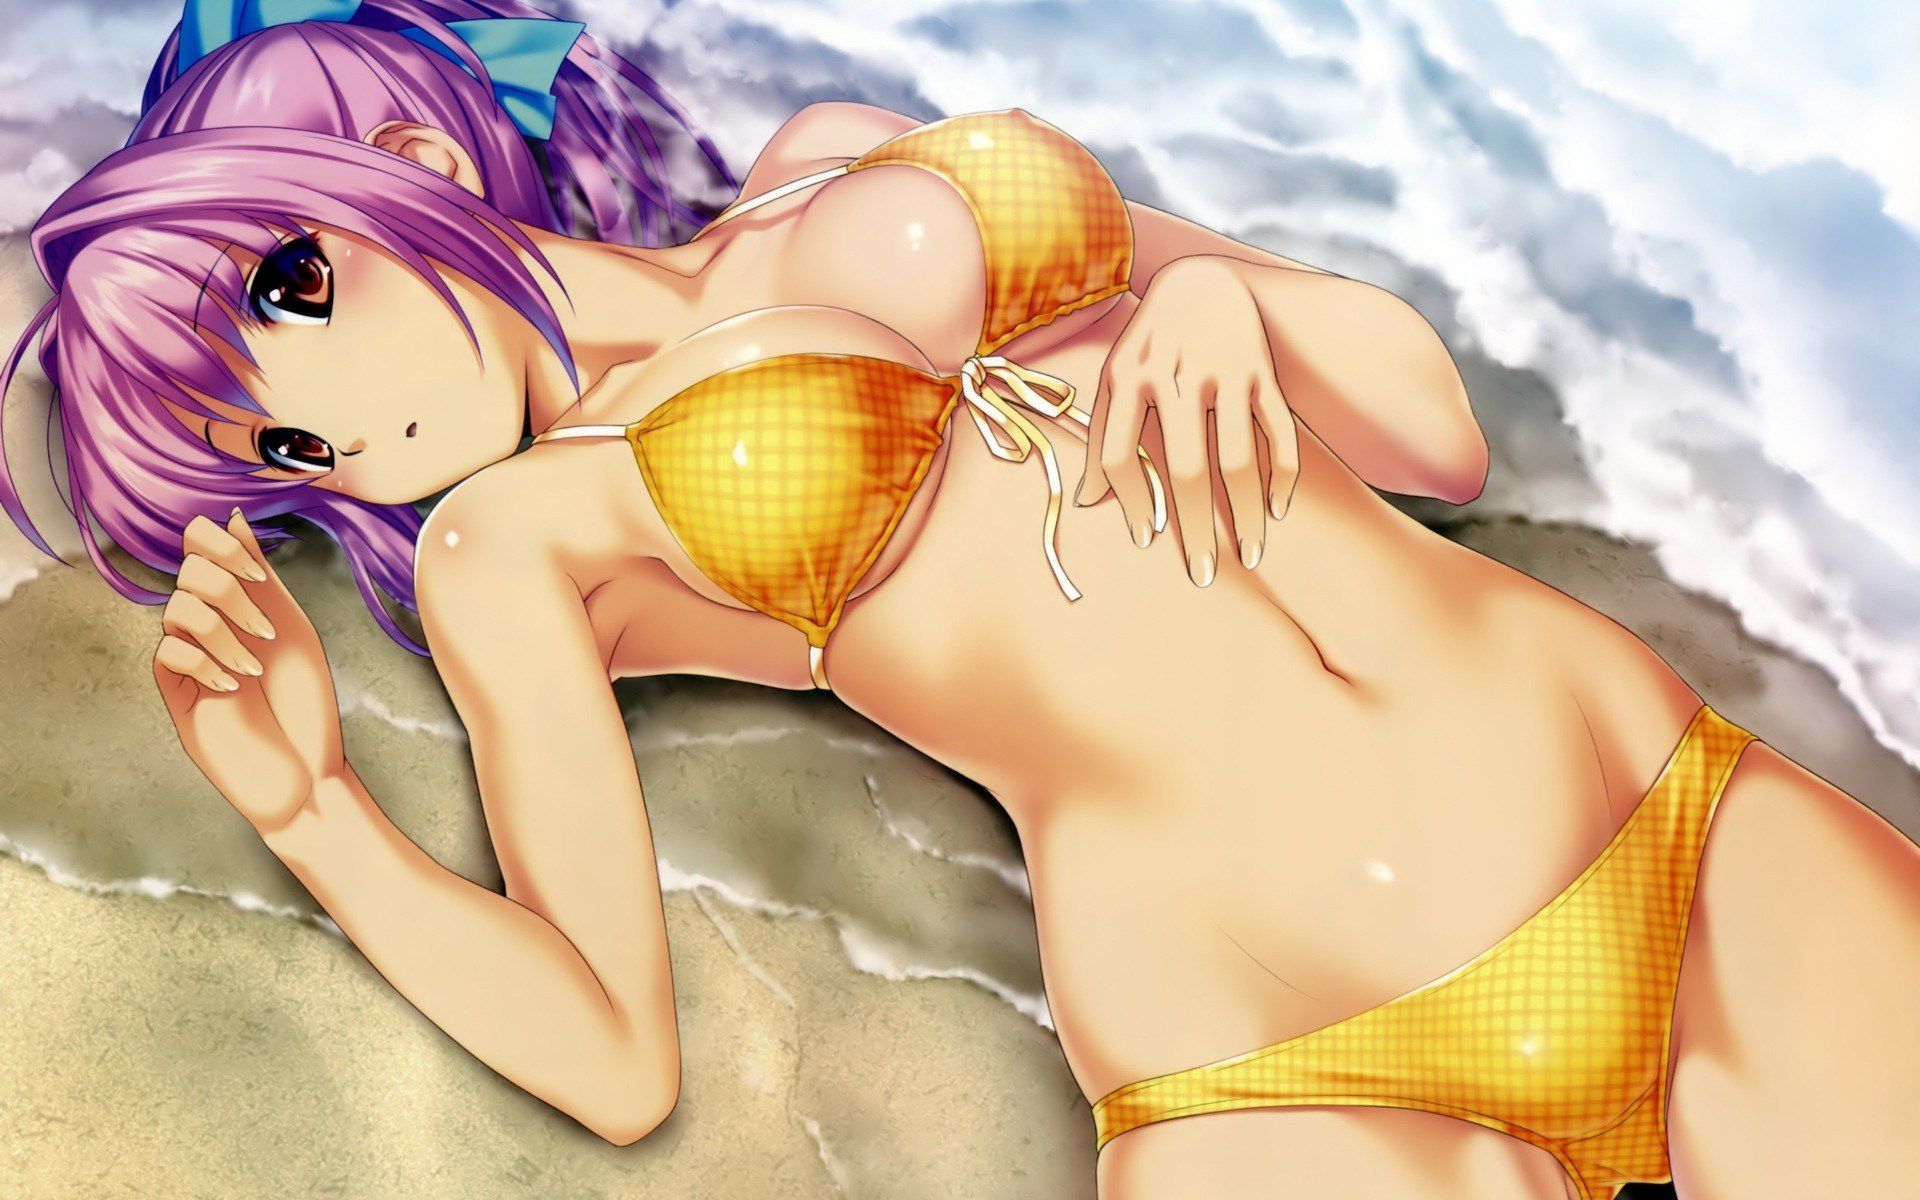 Will continue summer swimsuit pictures 37